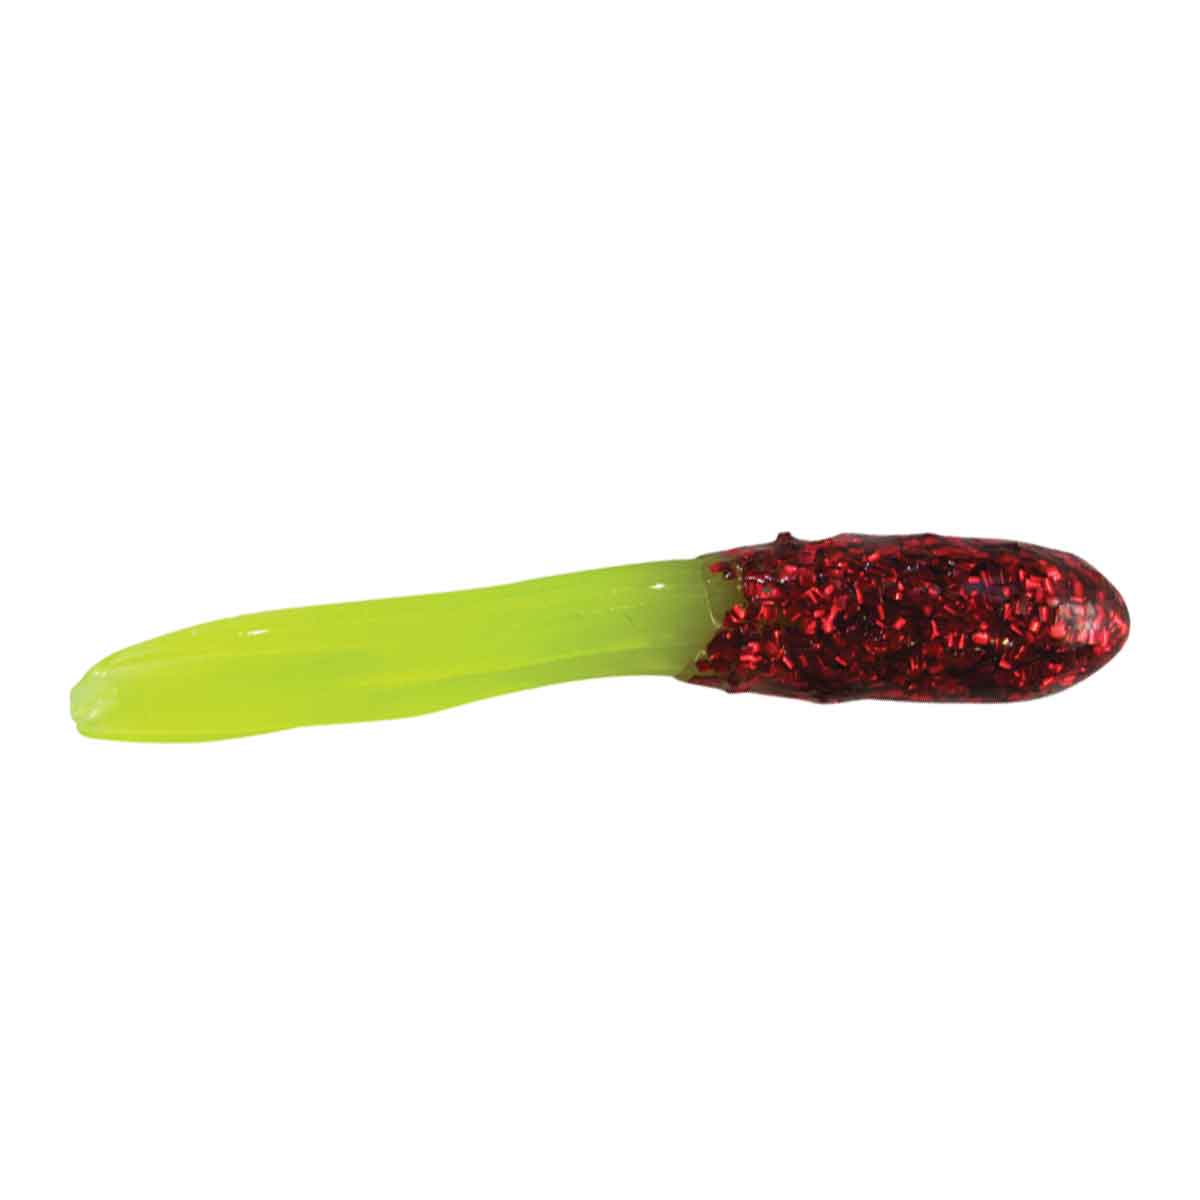 Scale Hustler_Red/Chartreuse